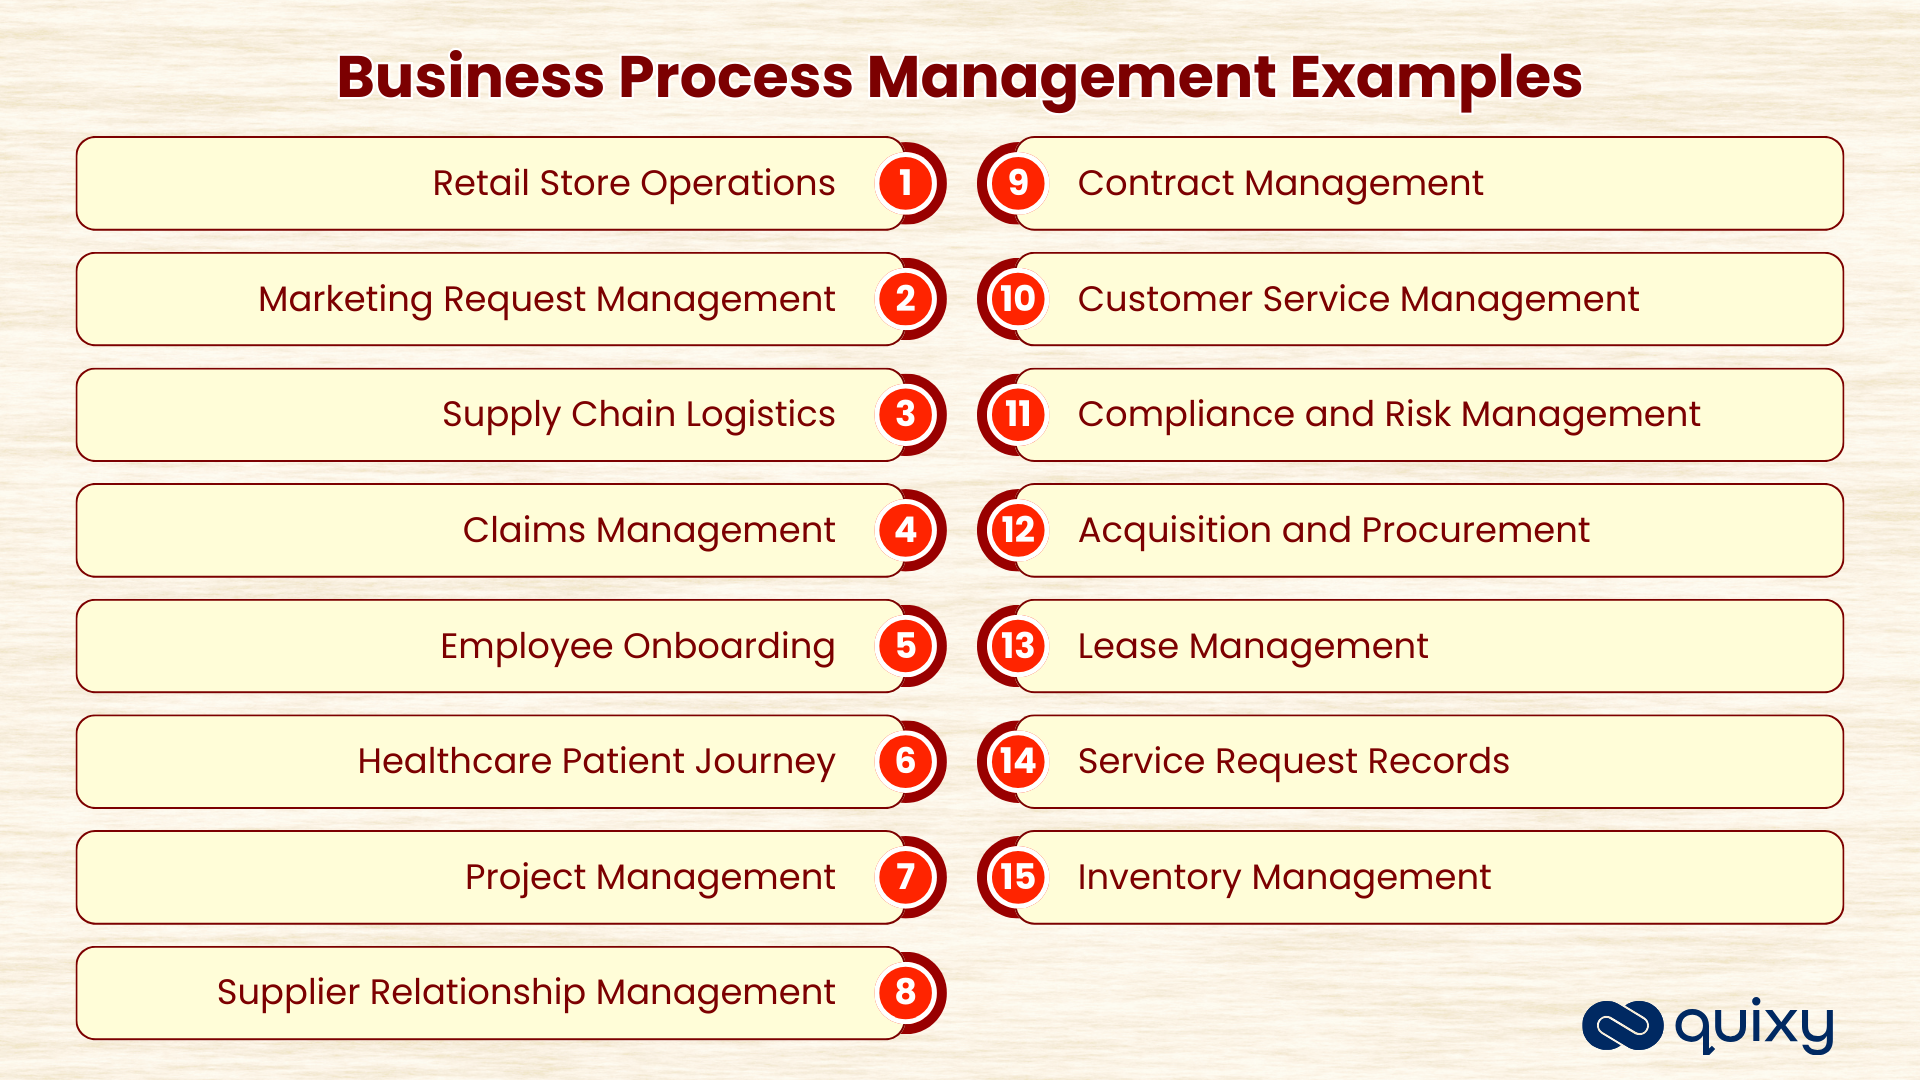 Business Process Management Examples